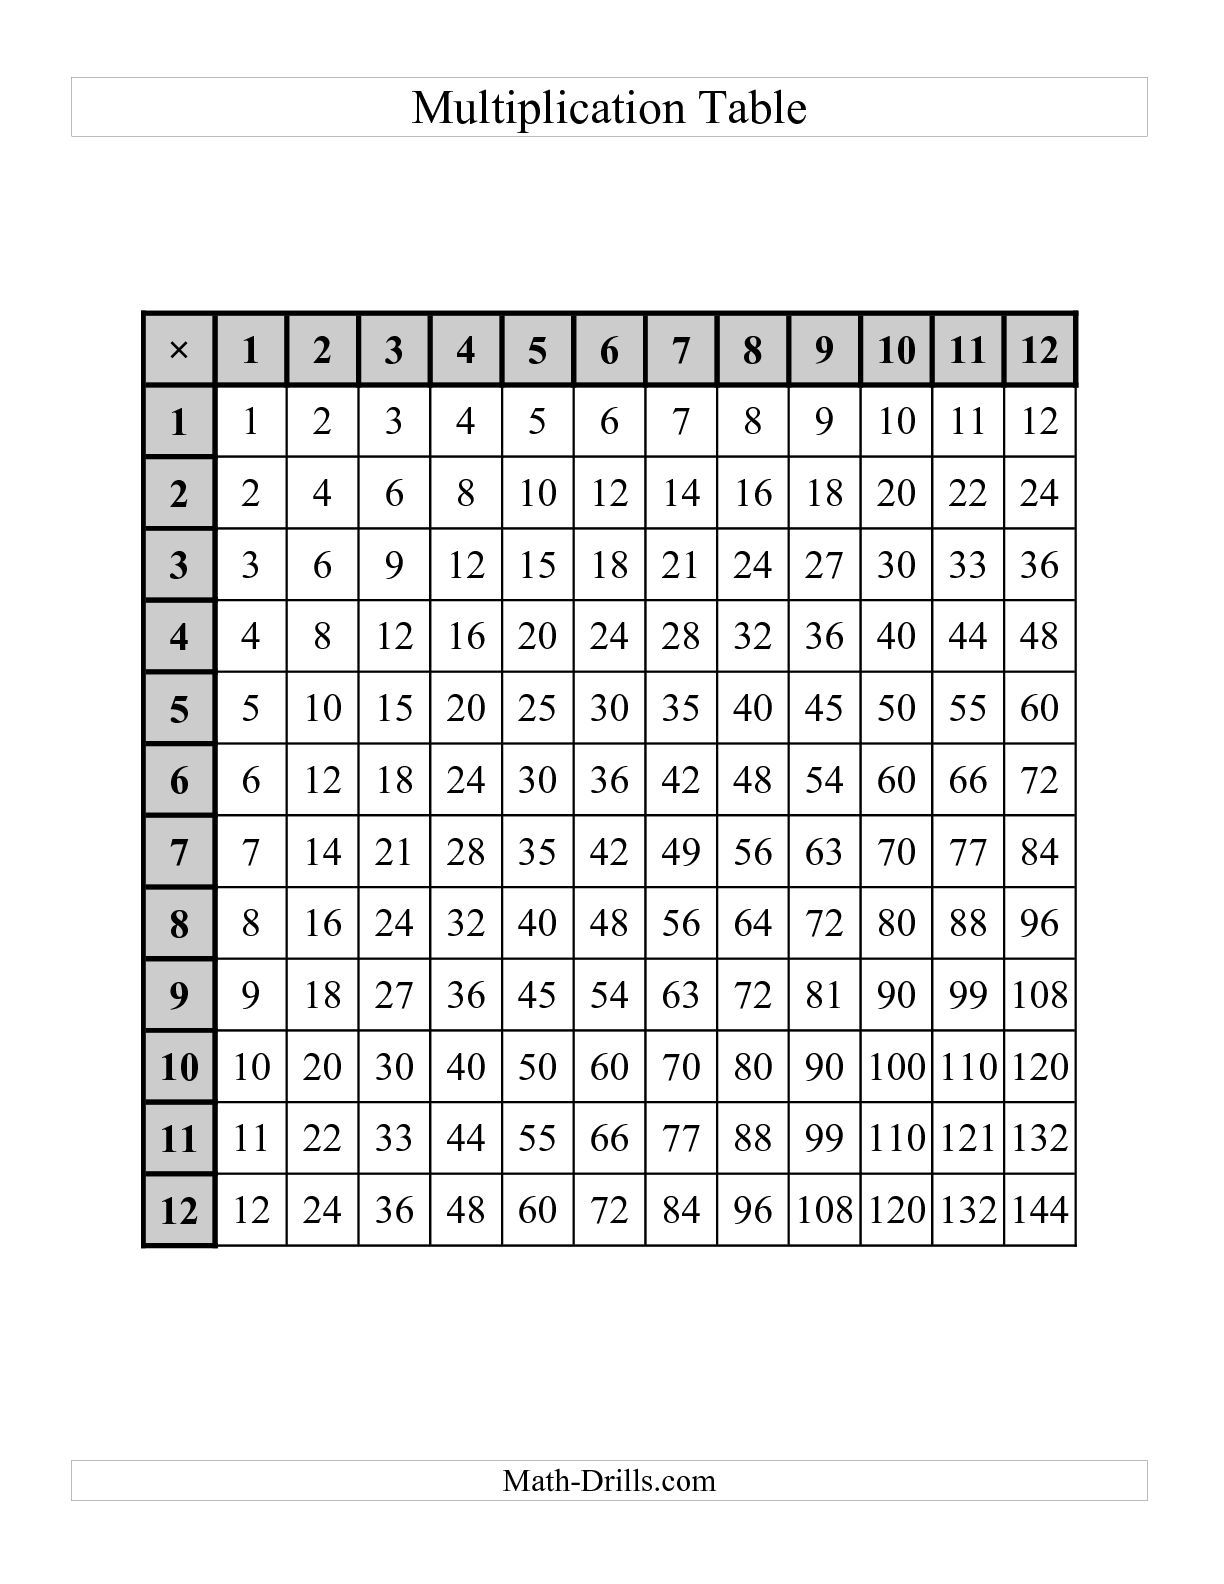 The Multiplication Tables To 144 -- One Per Page (D) Math